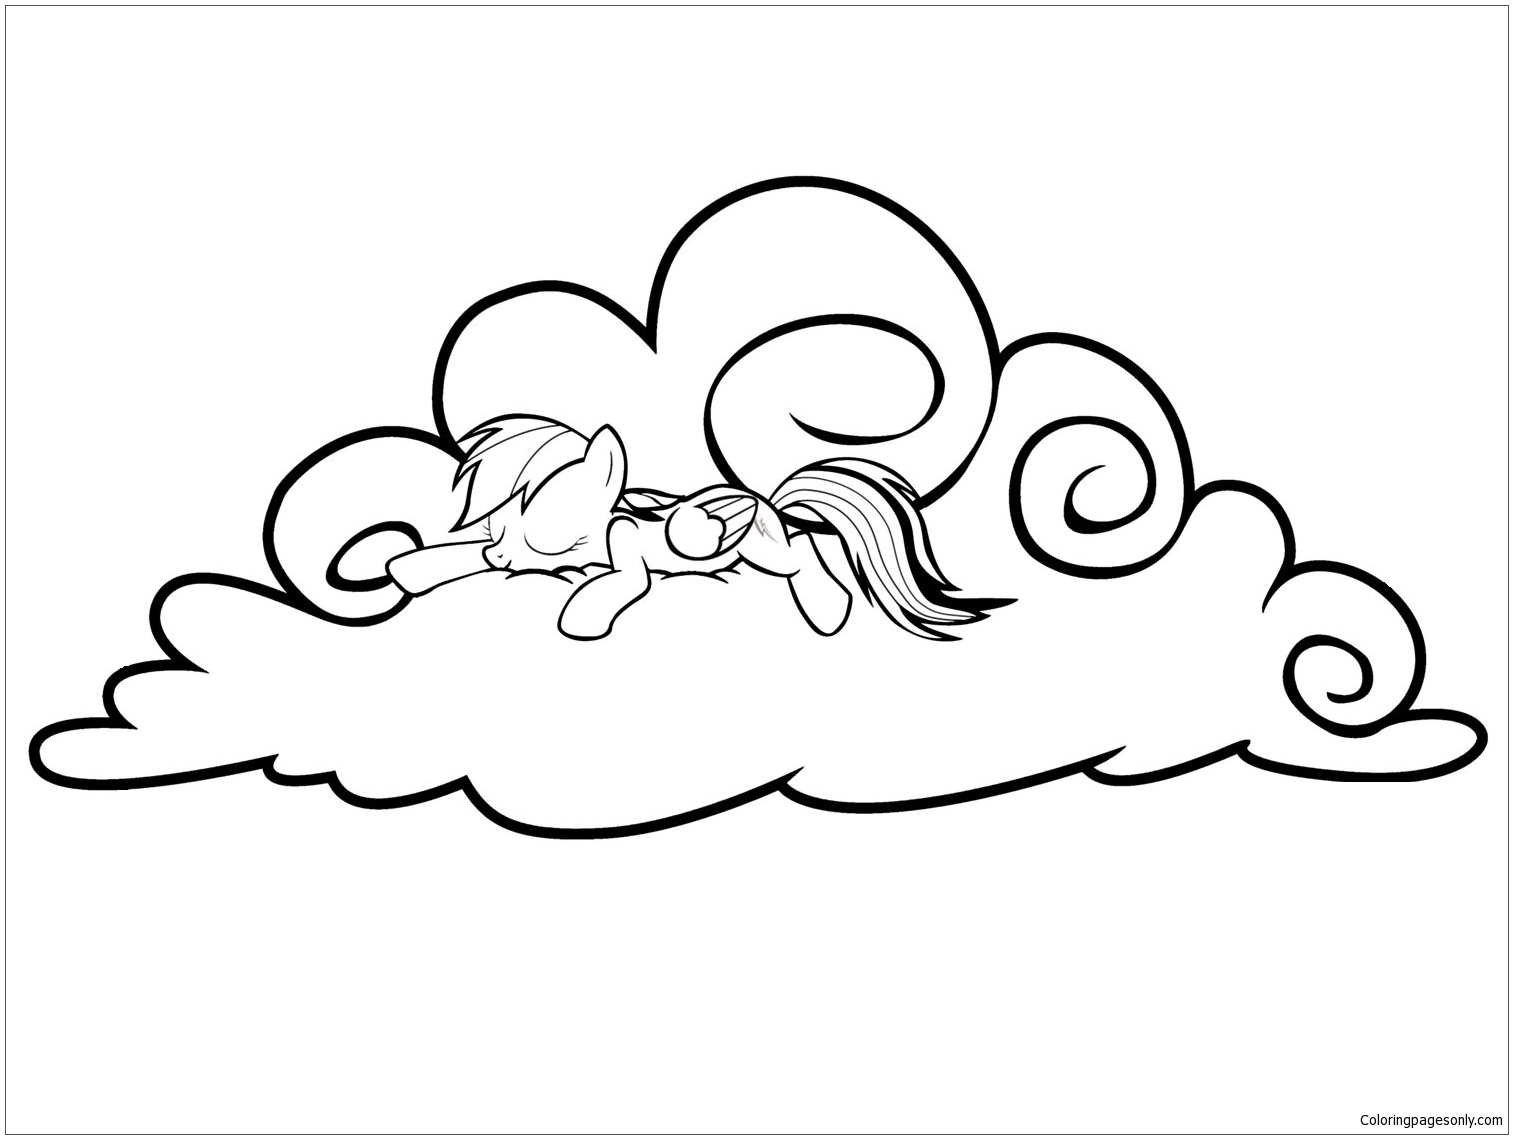 Rainbow Dash 4 Coloring Pages